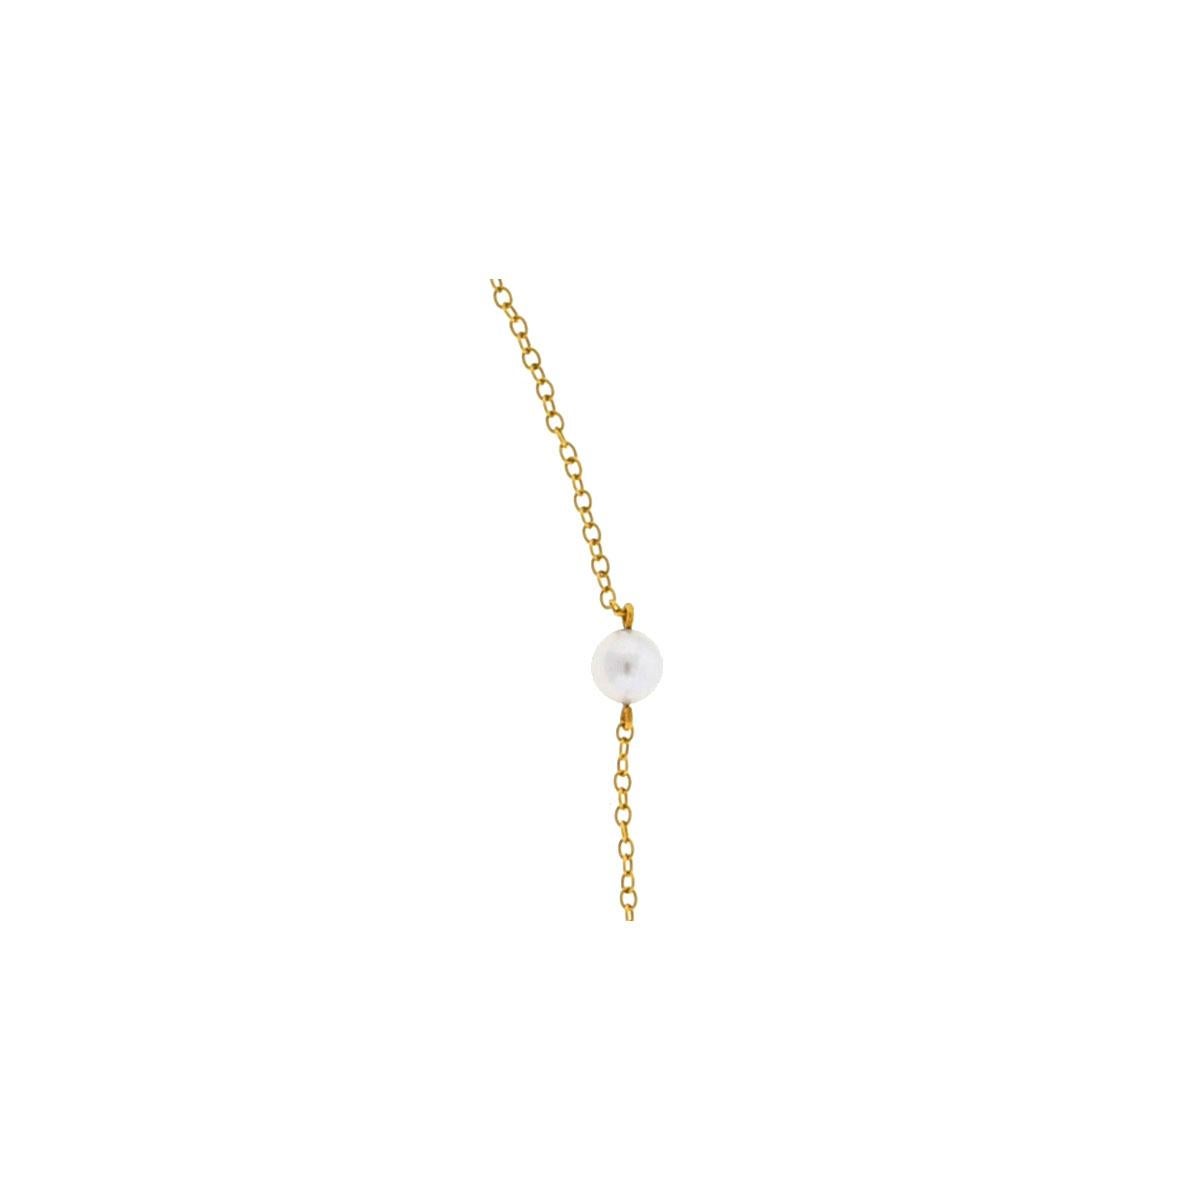 Mikimoto 18 Karat Yellow Gold with White Akoyo Cultured Pearls Station Necklace 4